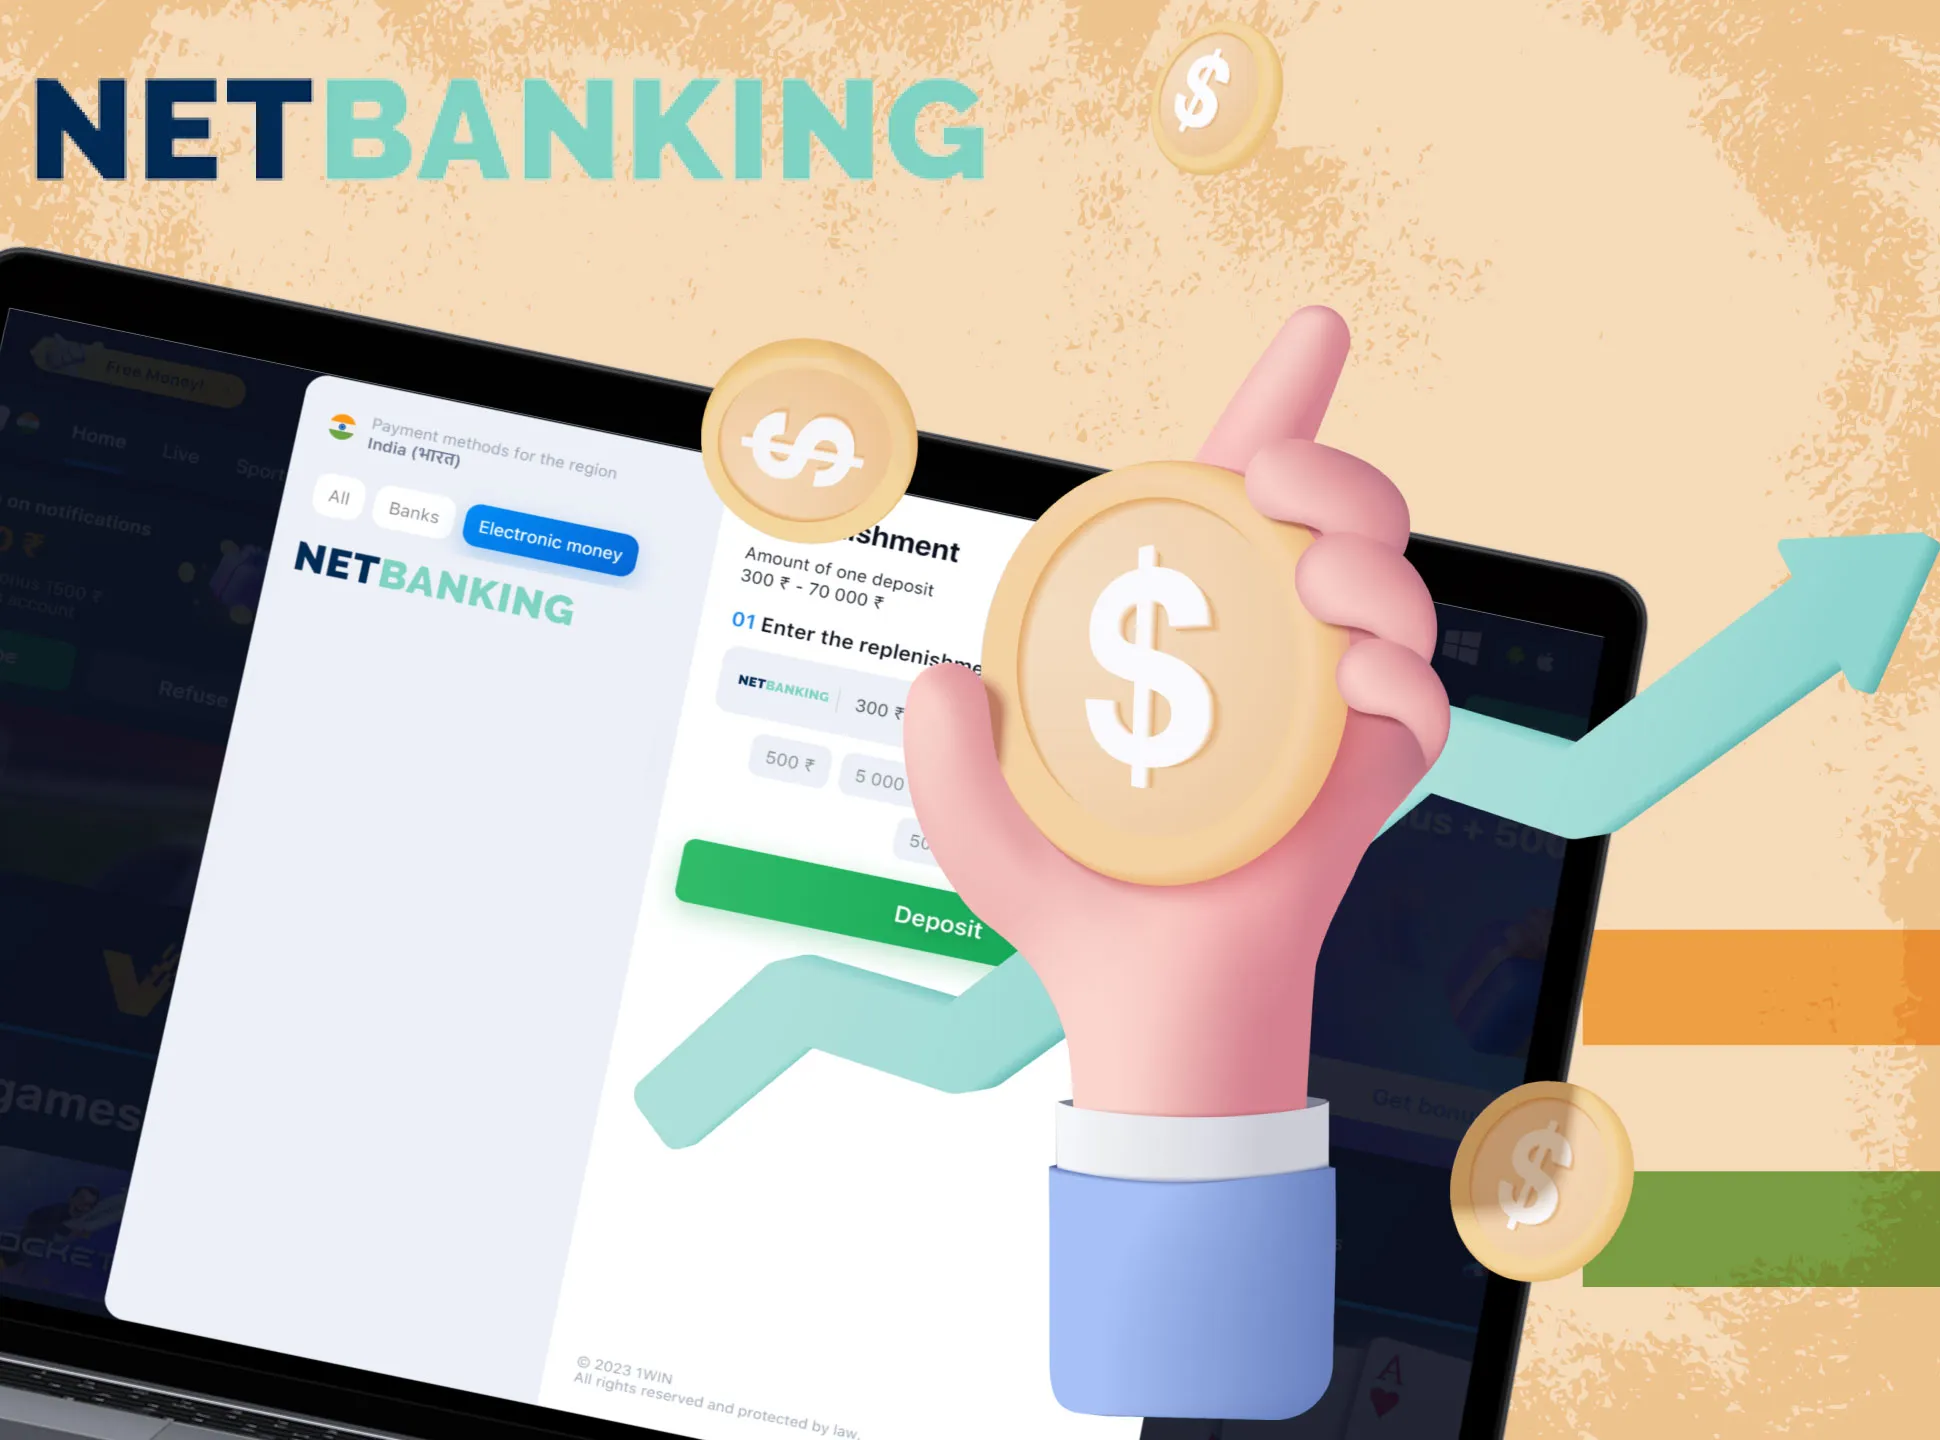 Top up your NetBanking account on your bank website.